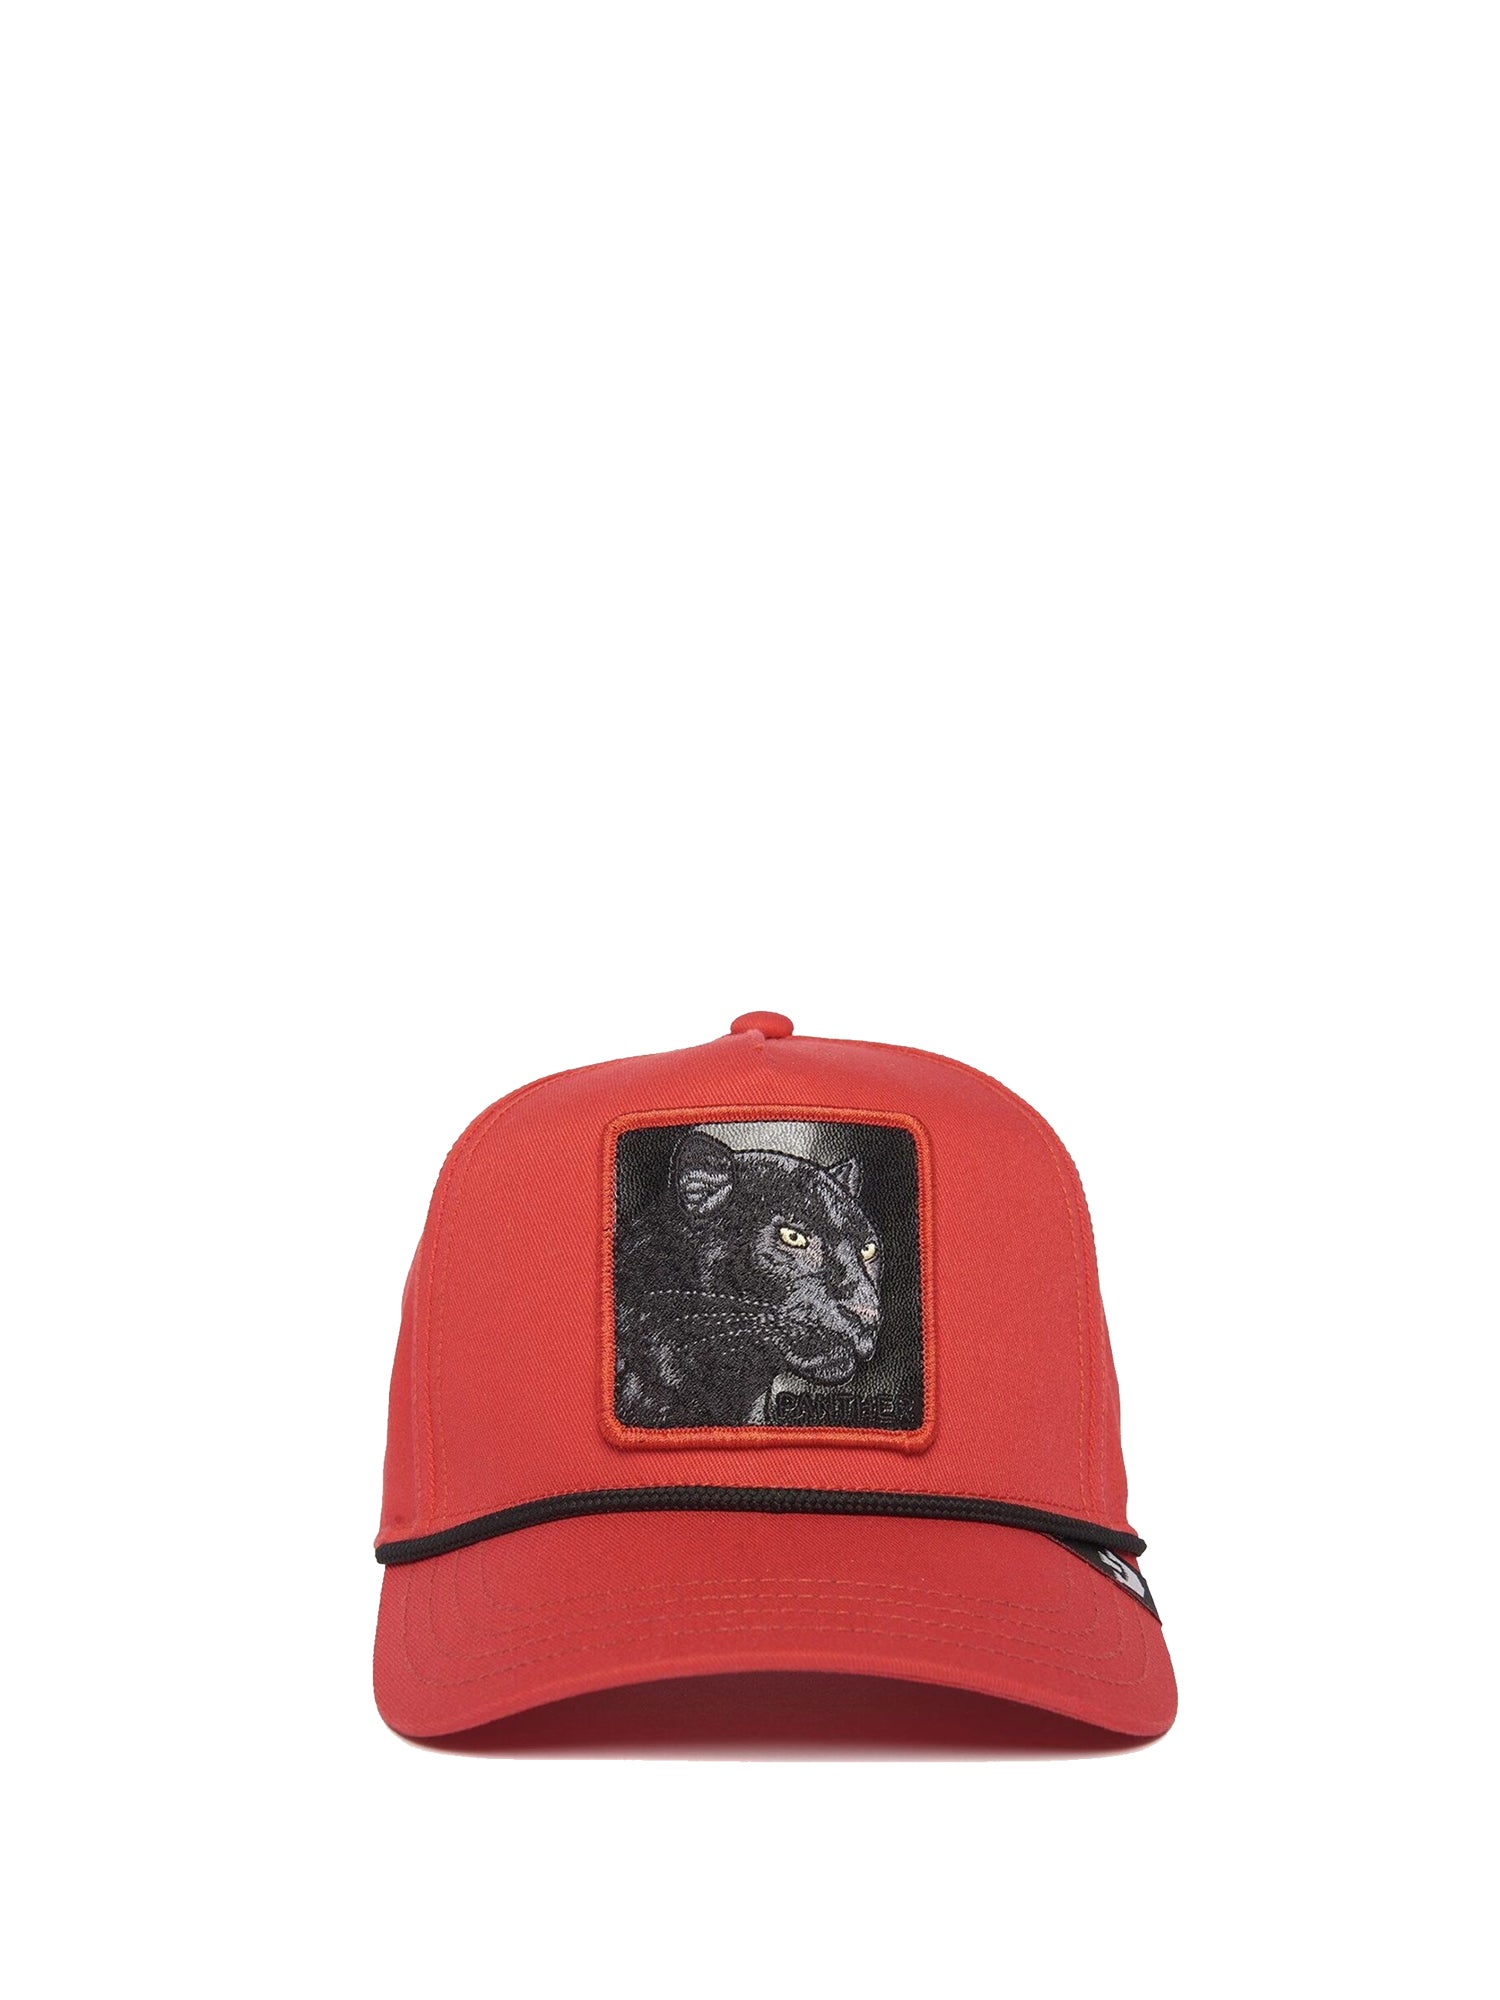 GOORIN BROS CAPPELLO PANTHER ROSSO